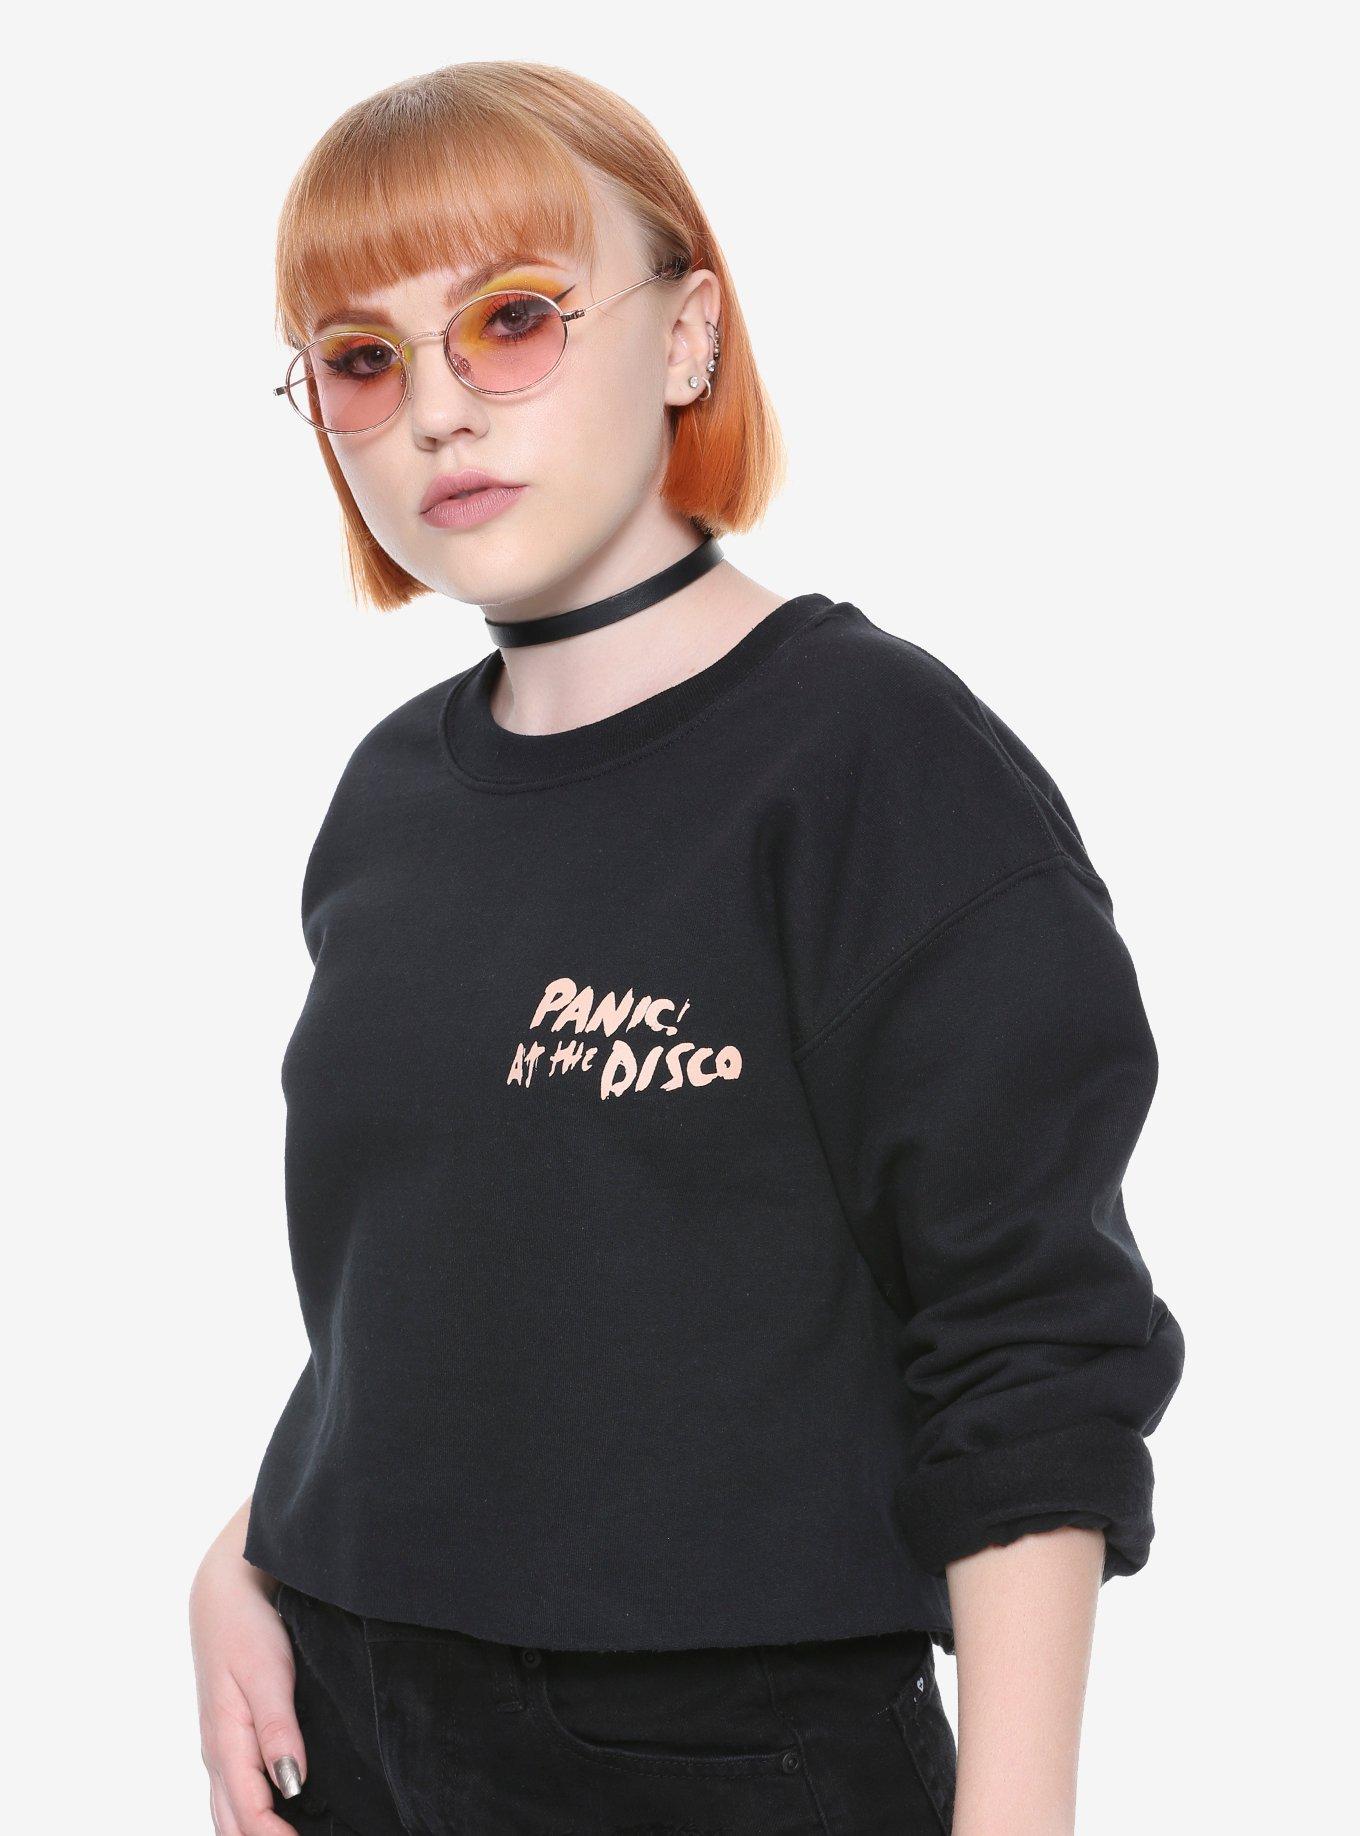 Panic! At The Disco Pray For The Wicked Crop Sweatshirt, BLACK, hi-res